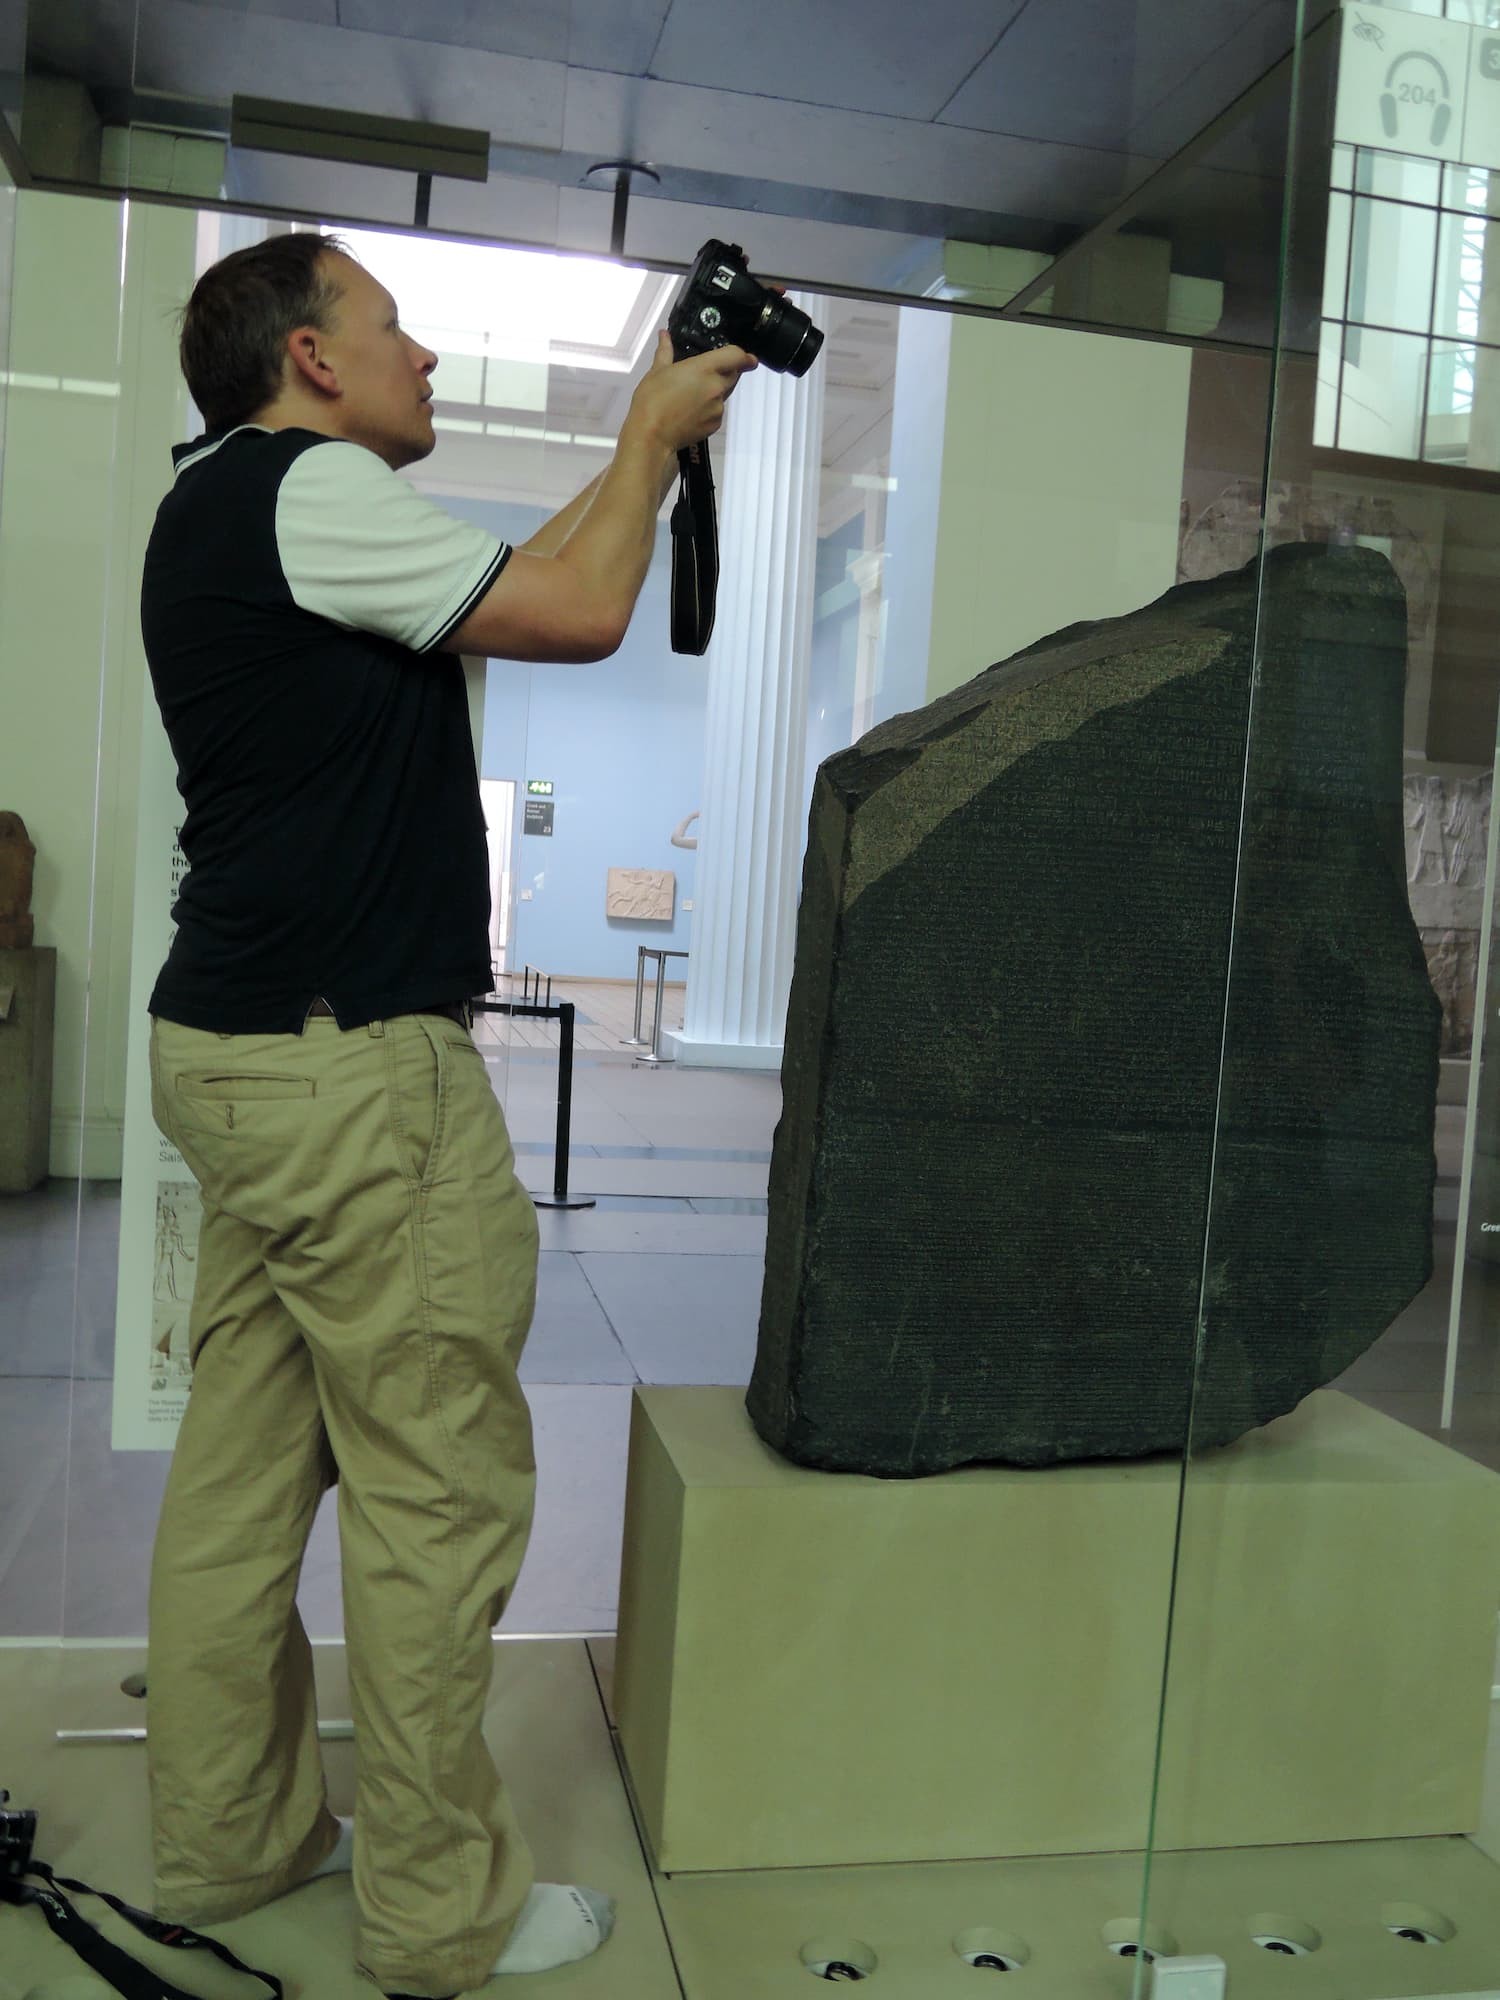 Scanning the Rosetta Stone in 2017, excuse the white socks, I just got off my bike